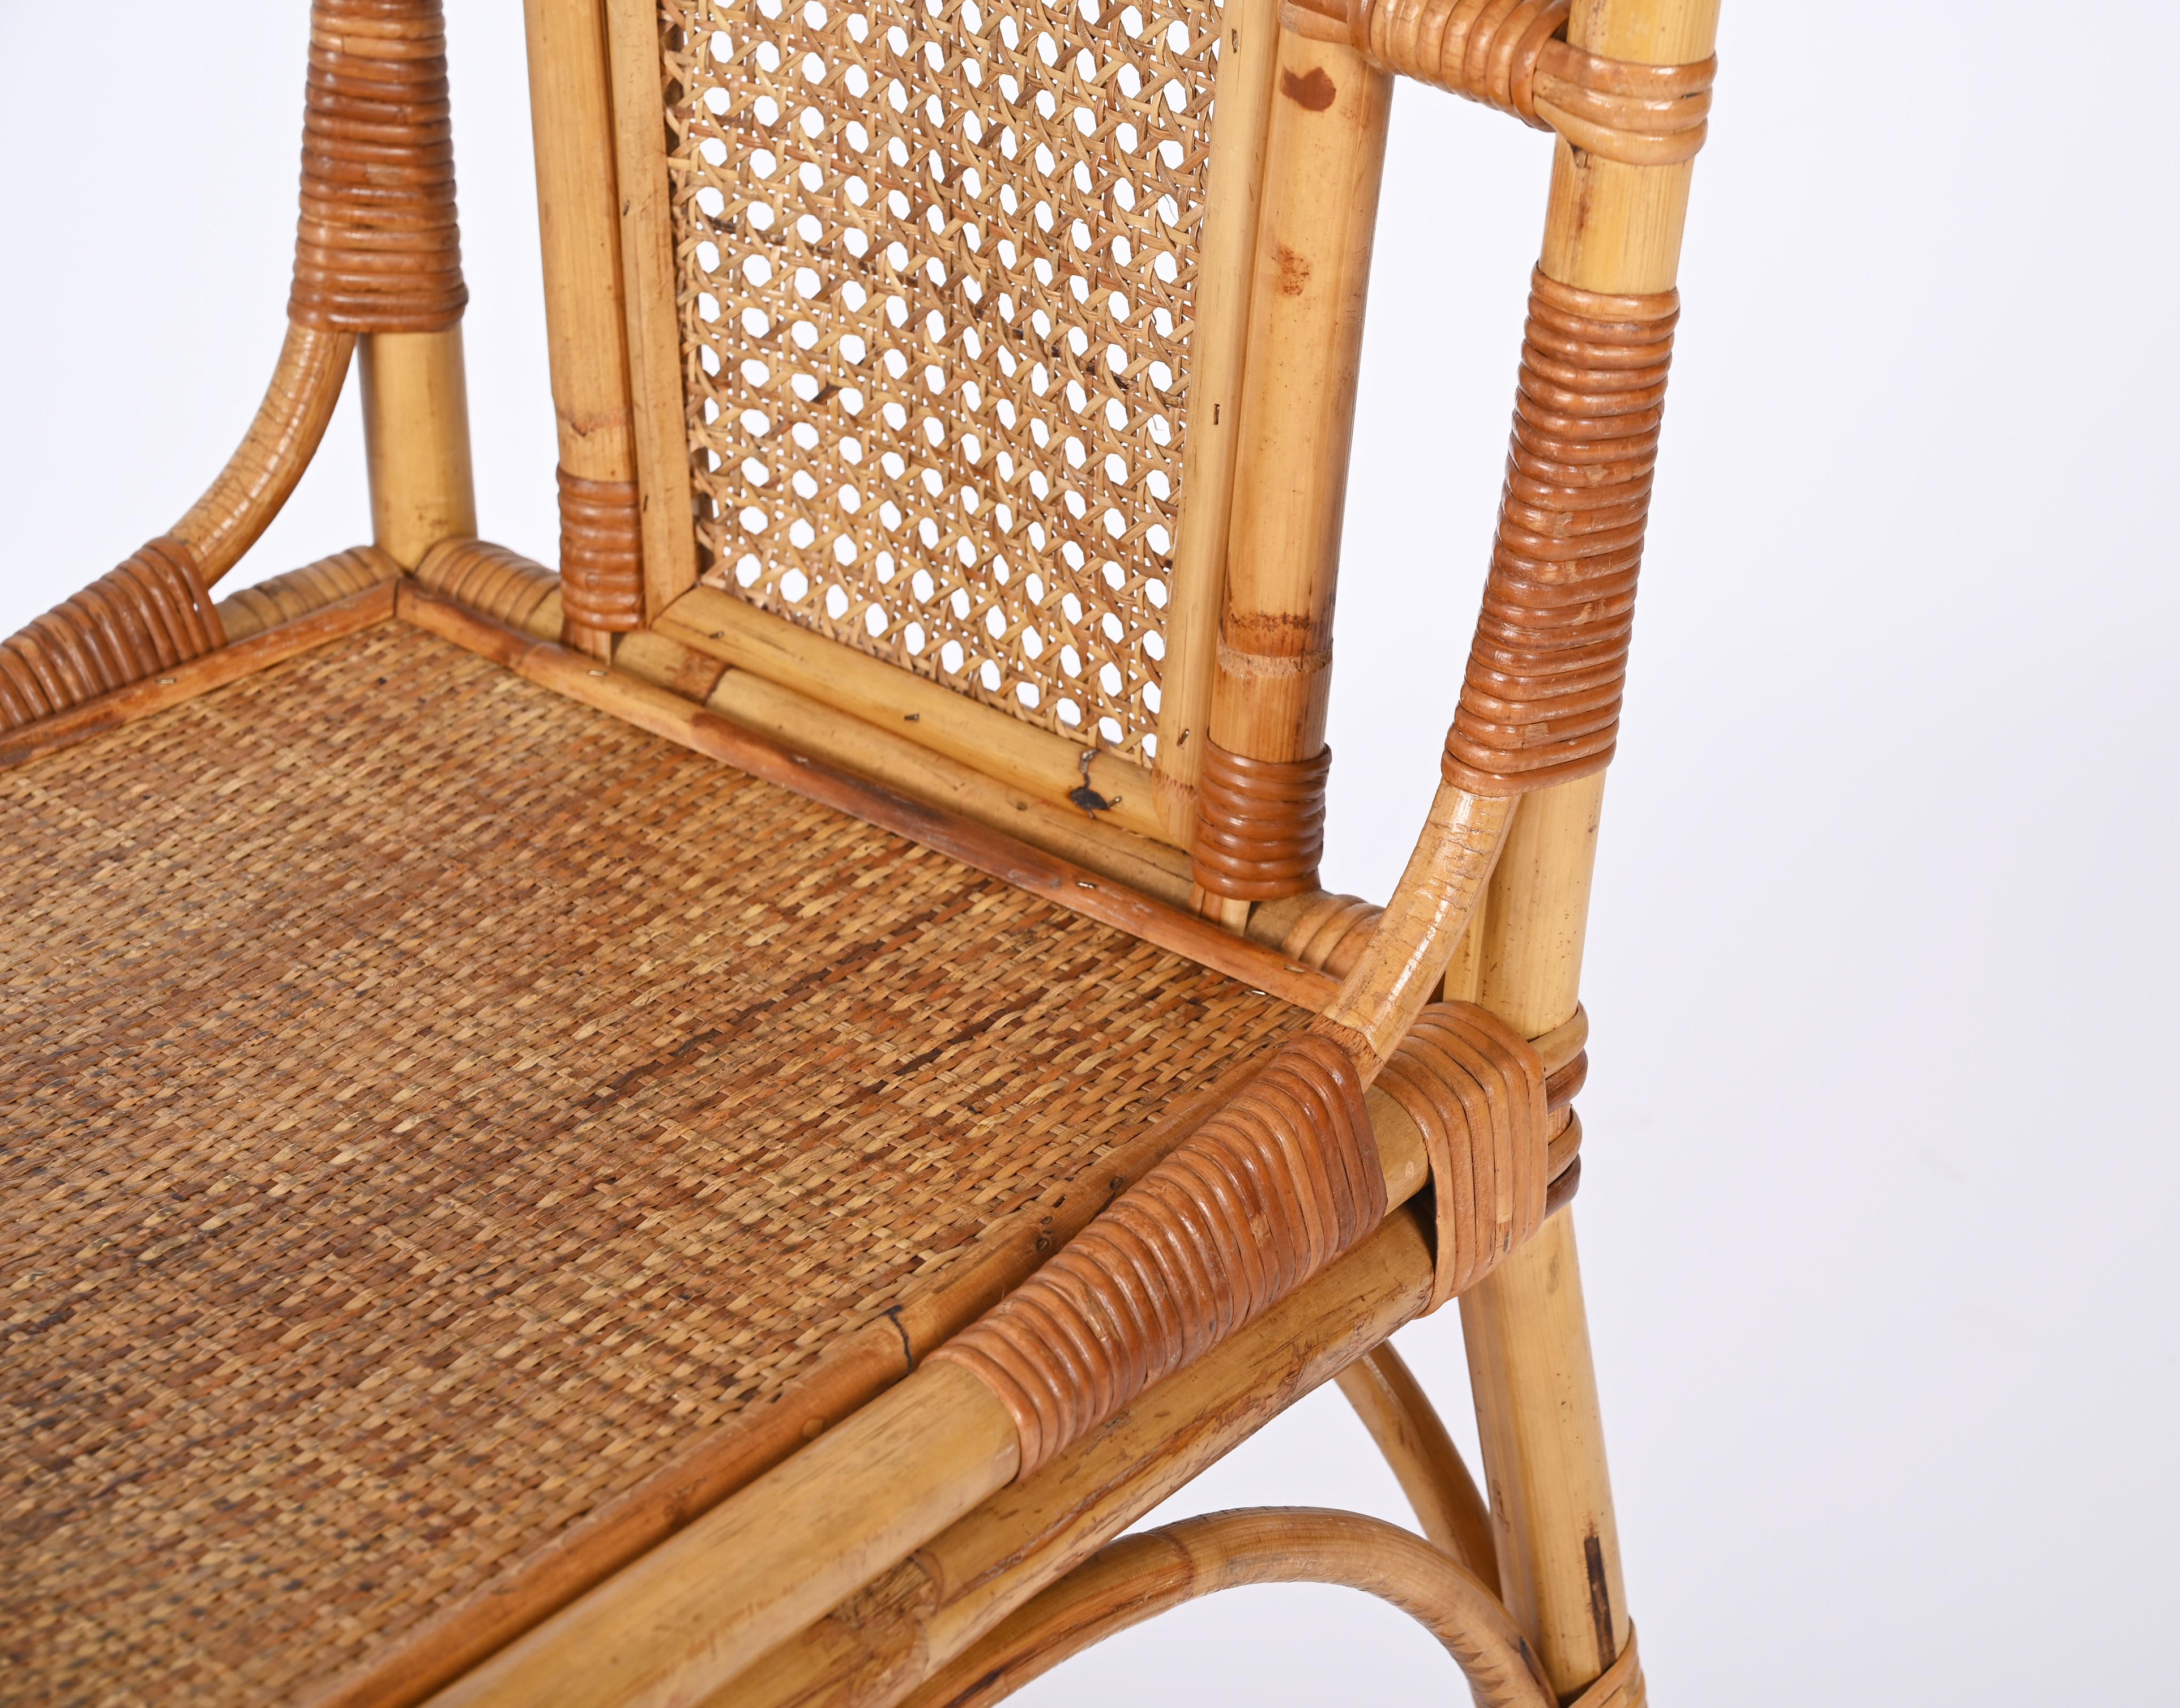 Sef of Four Bamboo and Vienna Straw Chairs, Vivai Del Sud, Italy 1970s For Sale 7